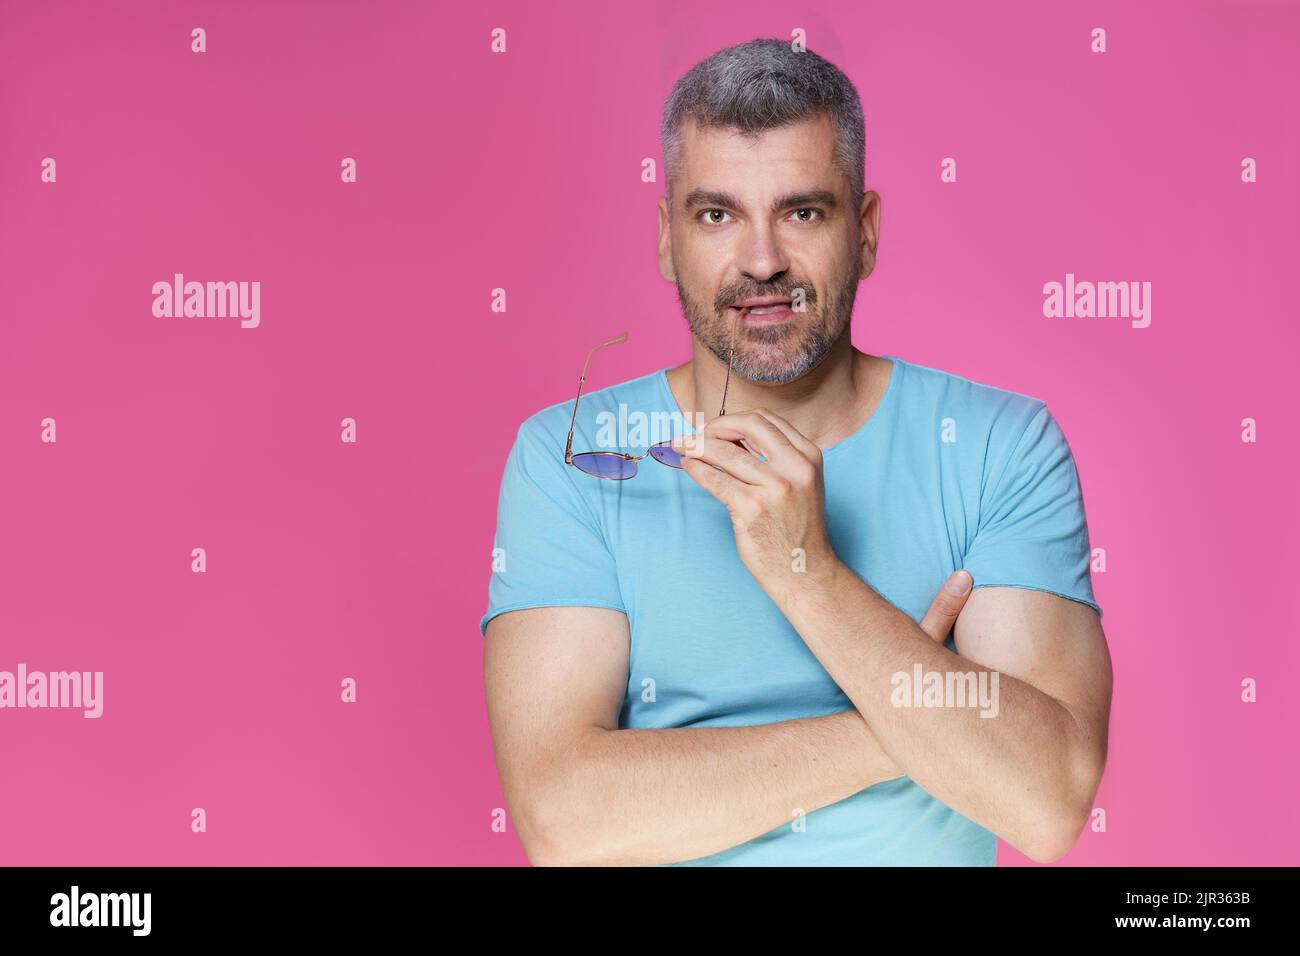 Handsome adult man with grey hair in casual isolated on pink background. Good-looking middle aged man standing with arms folded holding sunglasses and smile wearing blue t-shirt.  Stock Photo